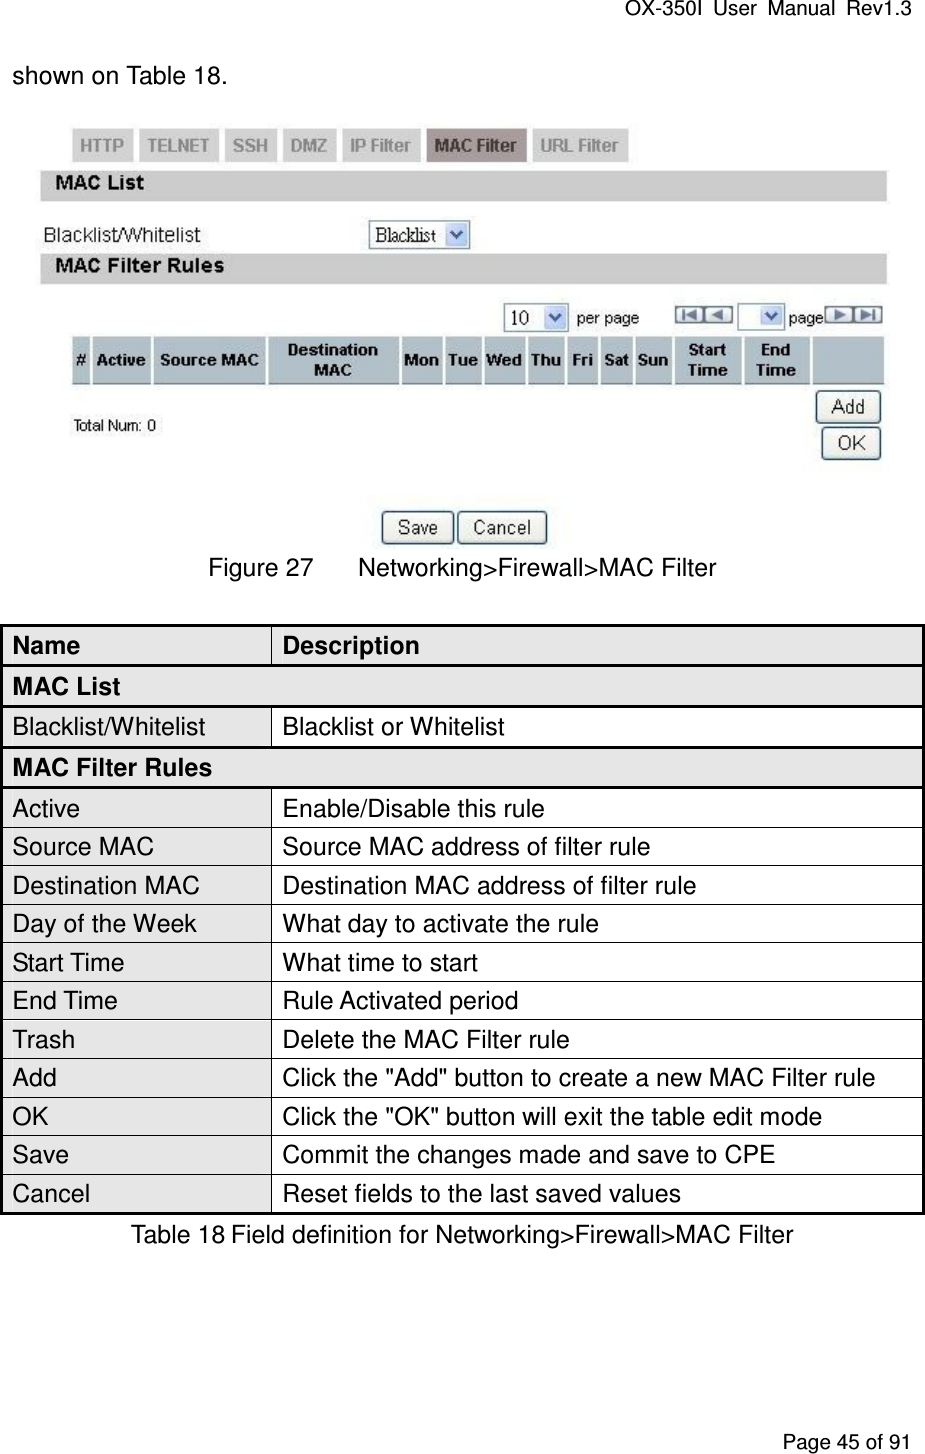 OX-350I  User  Manual  Rev1.3 Page 45 of 91 shown on Table 18.  Figure 27  Networking&gt;Firewall&gt;MAC Filter Name  Description MAC List Blacklist/Whitelist  Blacklist or Whitelist MAC Filter Rules Active  Enable/Disable this rule Source MAC  Source MAC address of filter rule Destination MAC  Destination MAC address of filter rule Day of the Week  What day to activate the rule Start Time  What time to start End Time  Rule Activated period Trash  Delete the MAC Filter rule Add  Click the &quot;Add&quot; button to create a new MAC Filter rule OK  Click the &quot;OK&quot; button will exit the table edit mode Save  Commit the changes made and save to CPE Cancel  Reset fields to the last saved values Table 18 Field definition for Networking&gt;Firewall&gt;MAC Filter 